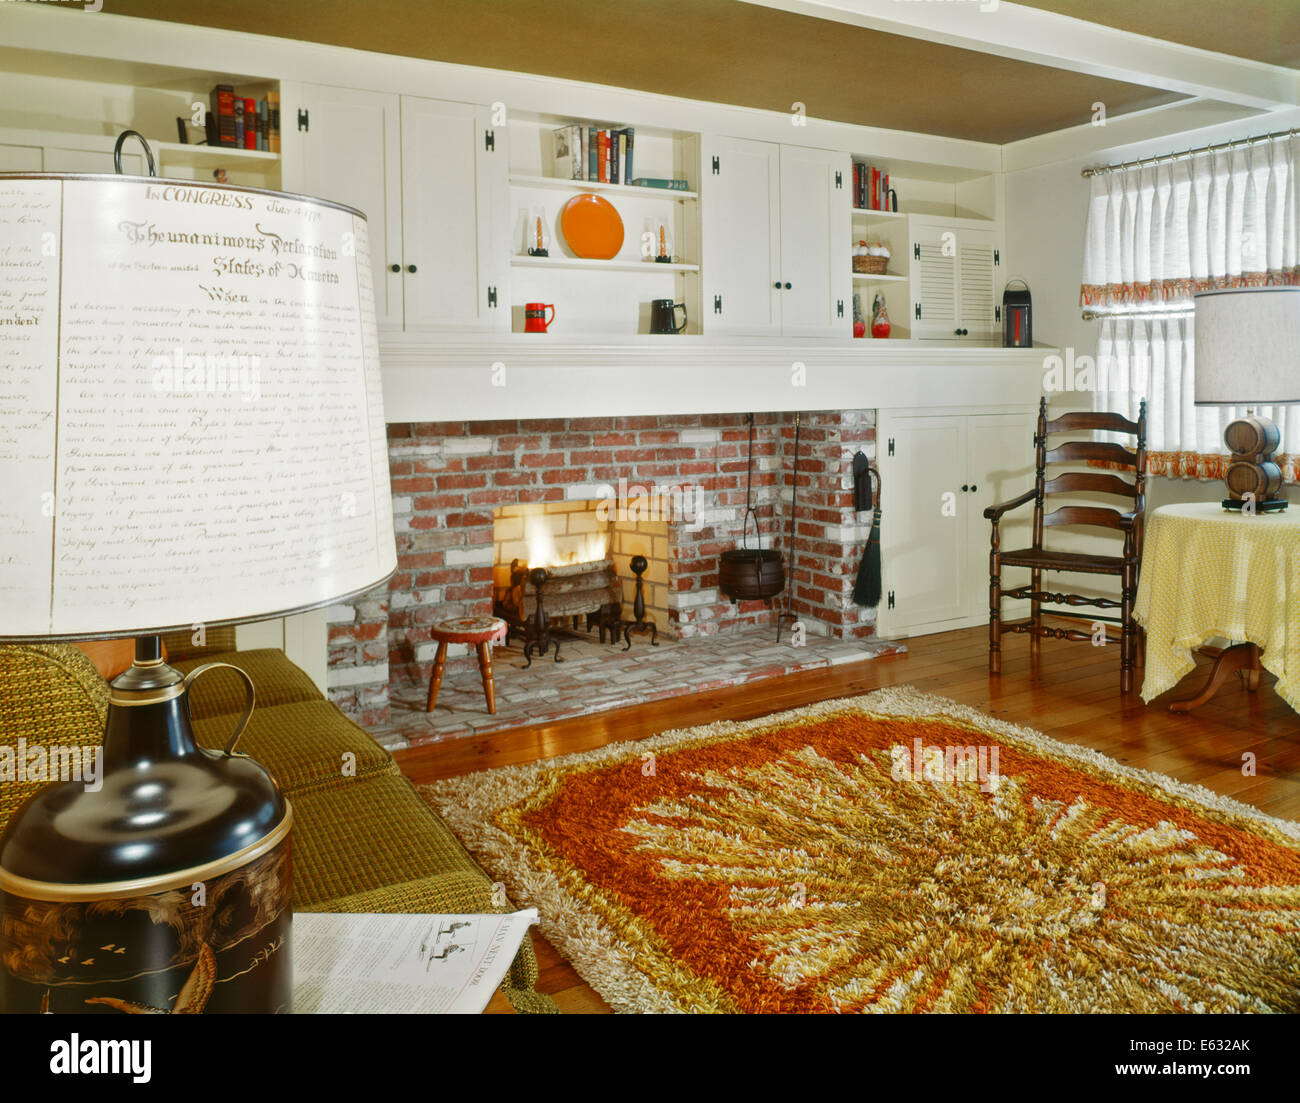 1960s INTERIOR OF LIVING ROOM WITH SHAG AREA RUG FIREPLACE AND